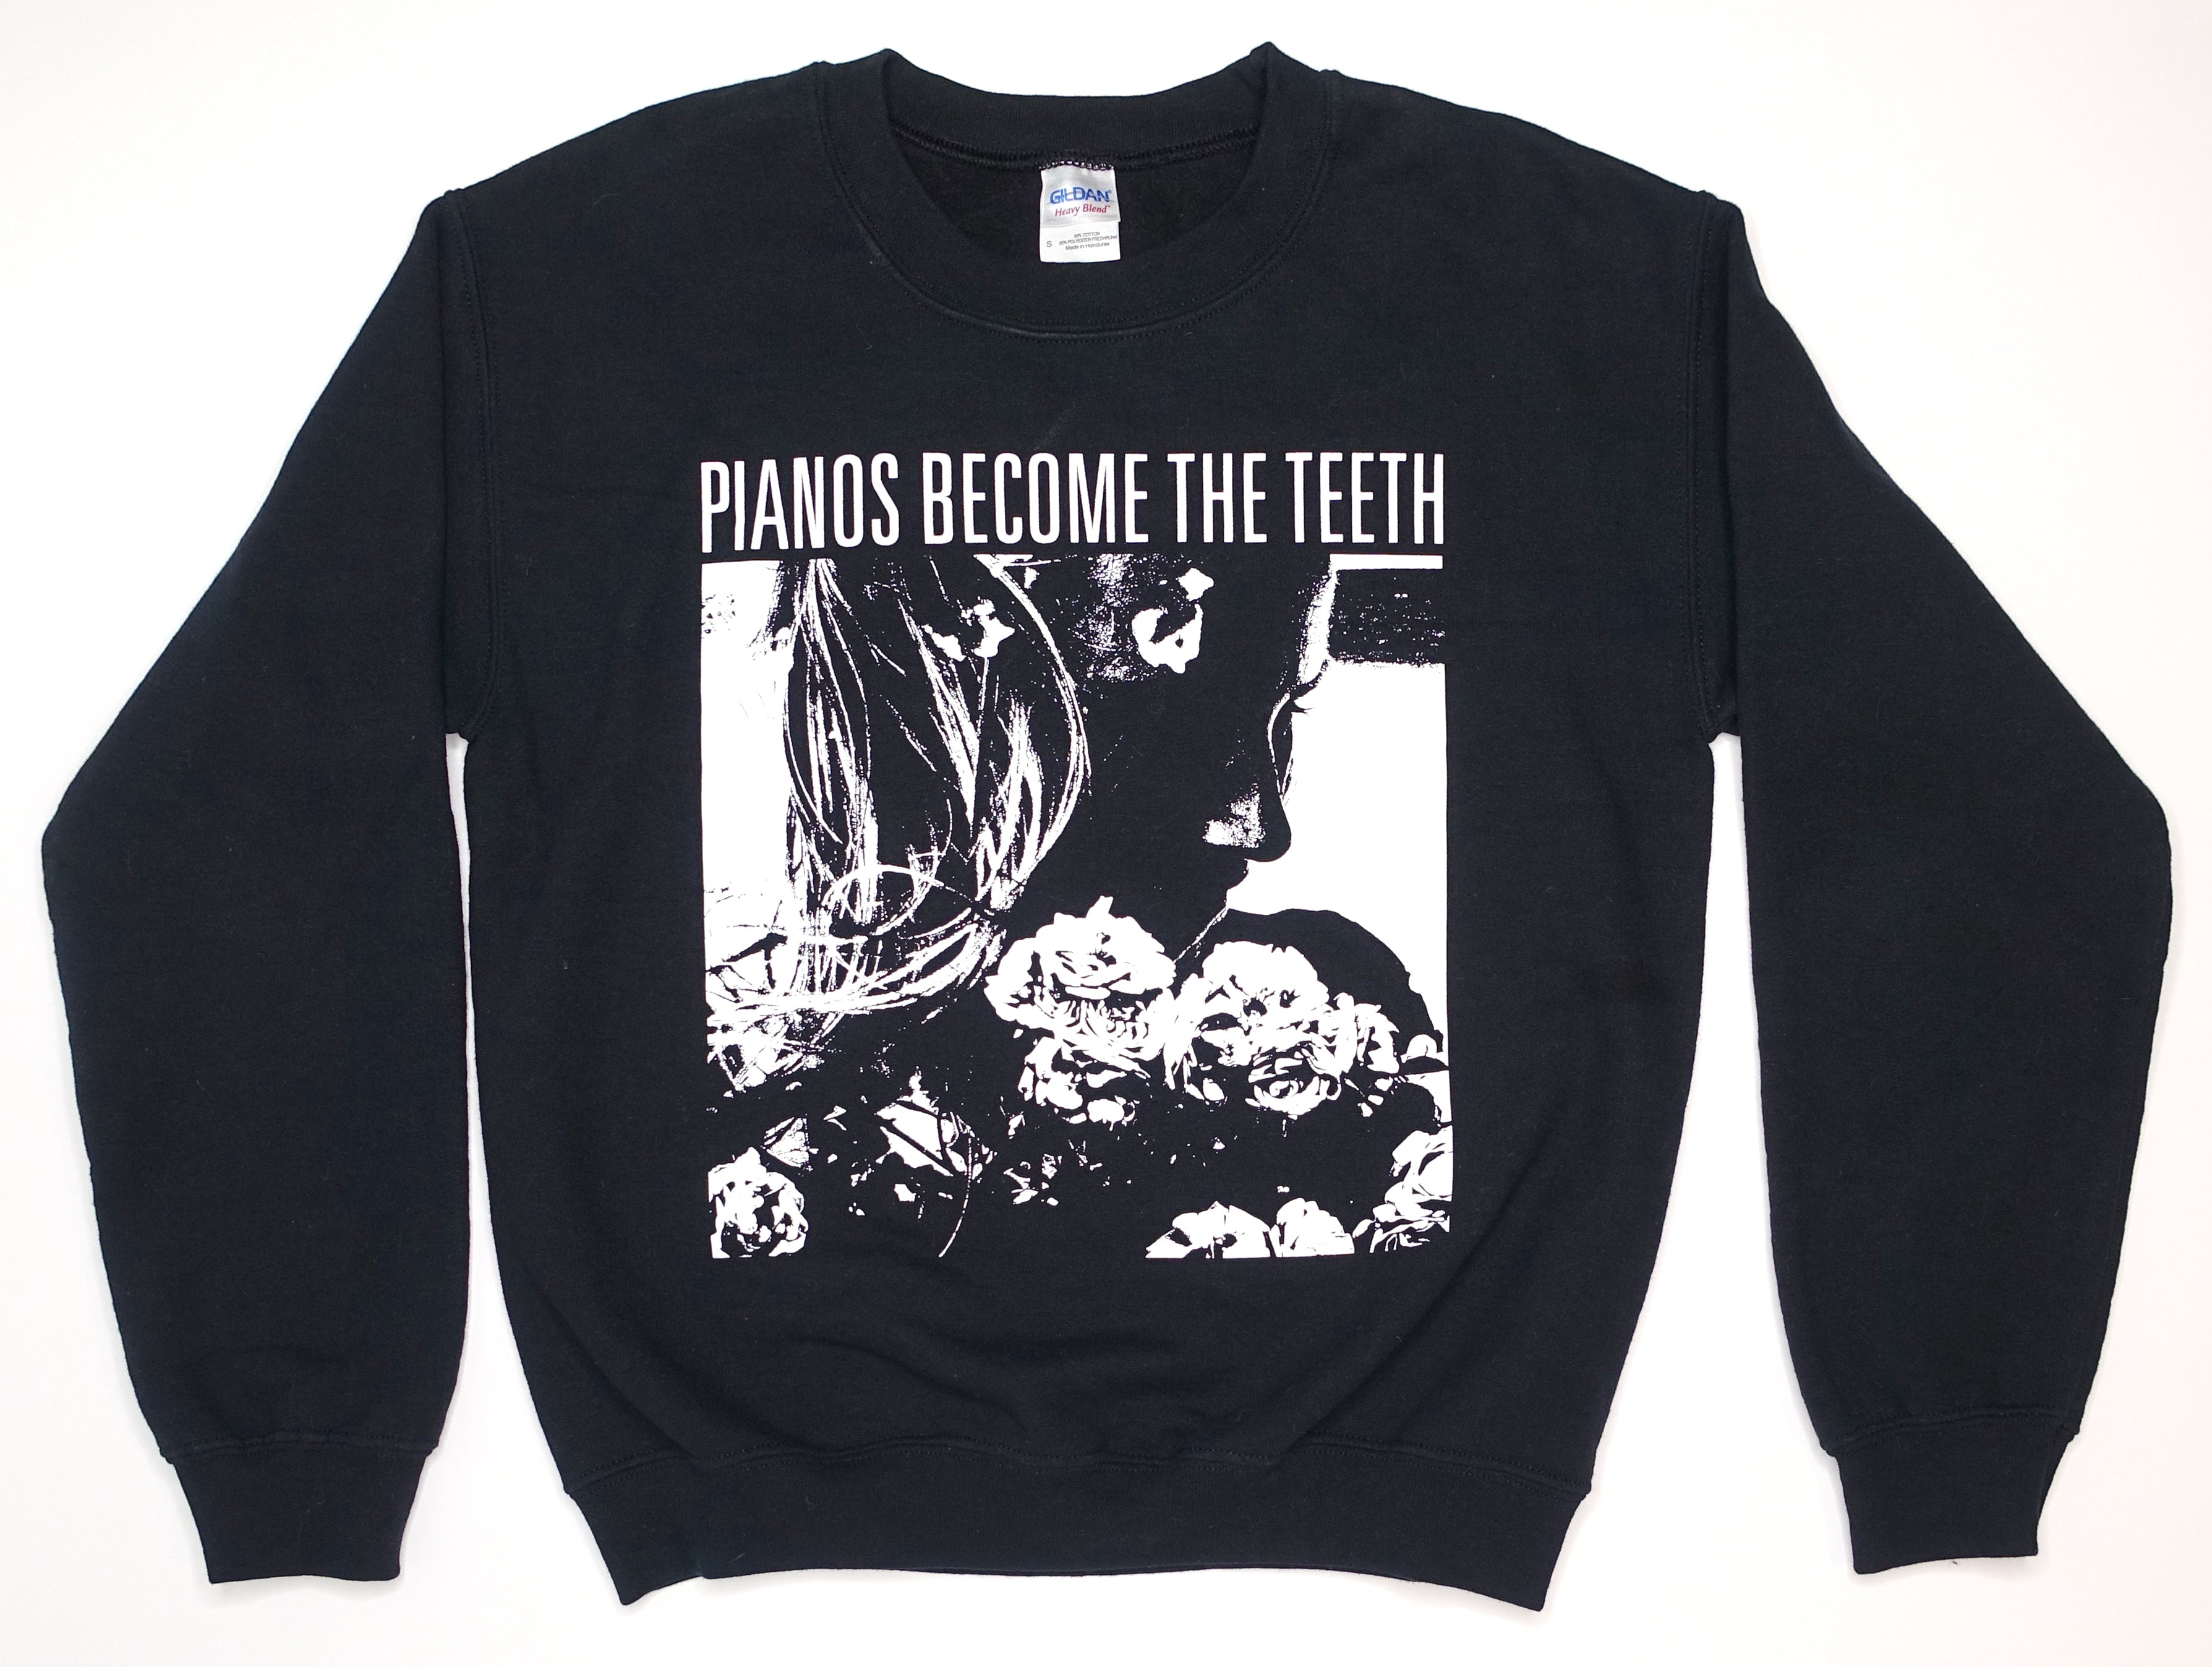 Pianos Become The Teeth - Girl With Flower Tour Sweat Shirt Size Small